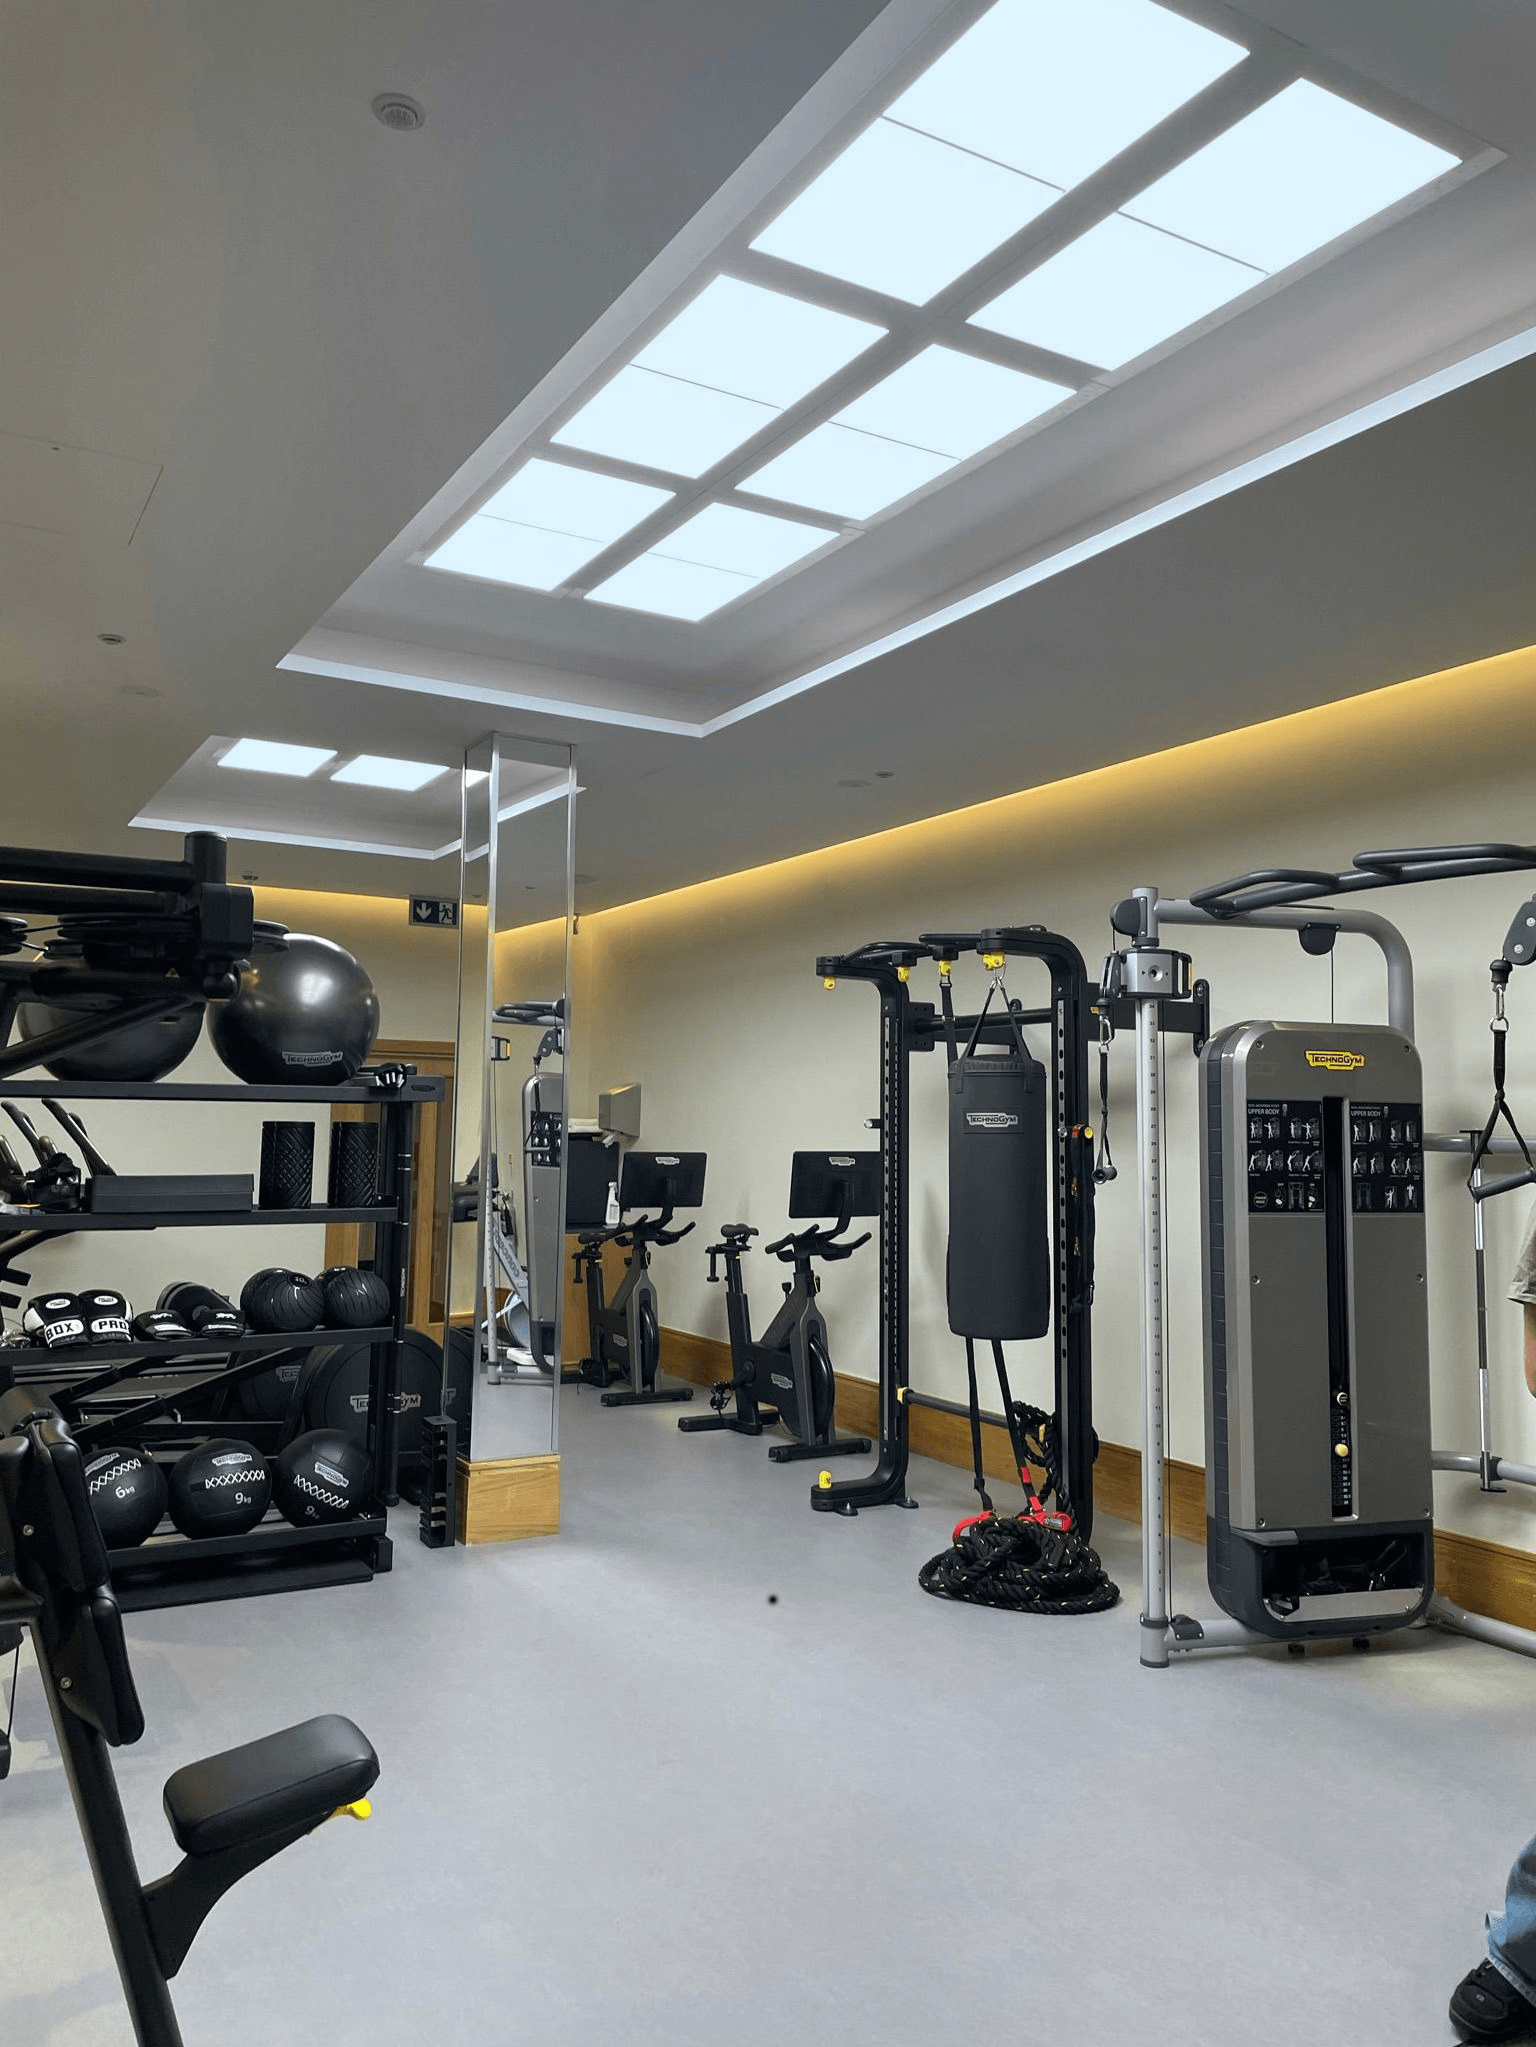 Innerscene installation case study cool lighting above exercise machines at Aman Spa The Connaught Hotel London